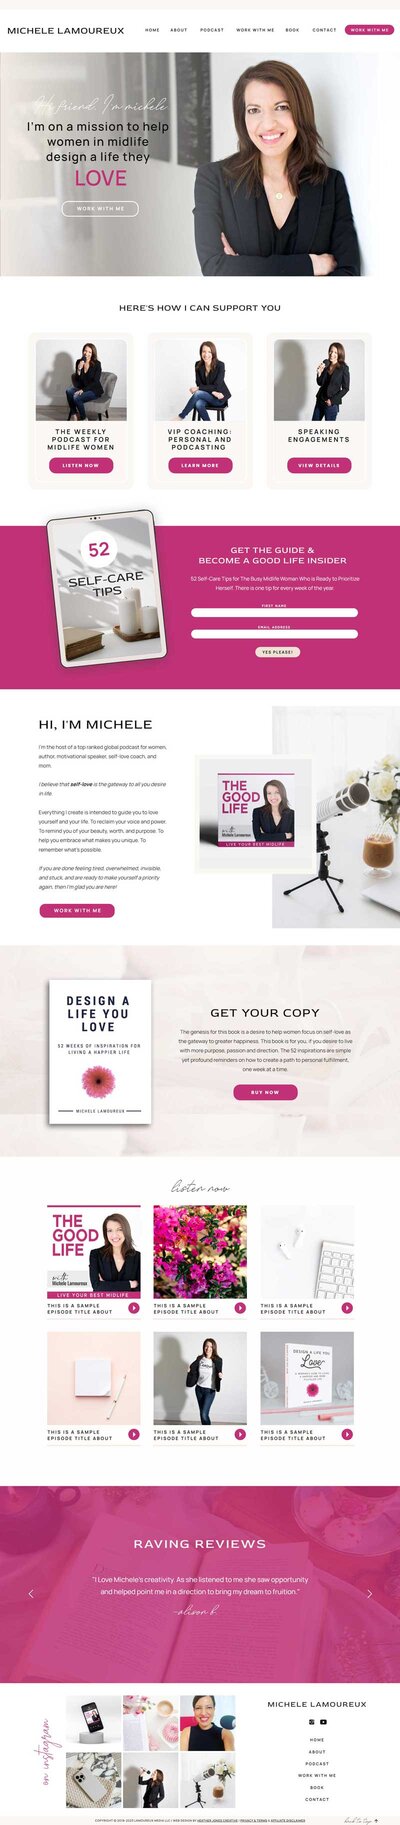 Dive into the heart of Michele's online presence with a comprehensive view of her homepage. Designed to captivate by a Showit Web Design expert, this layout combines functionality with aesthetic appeal seamlessly.